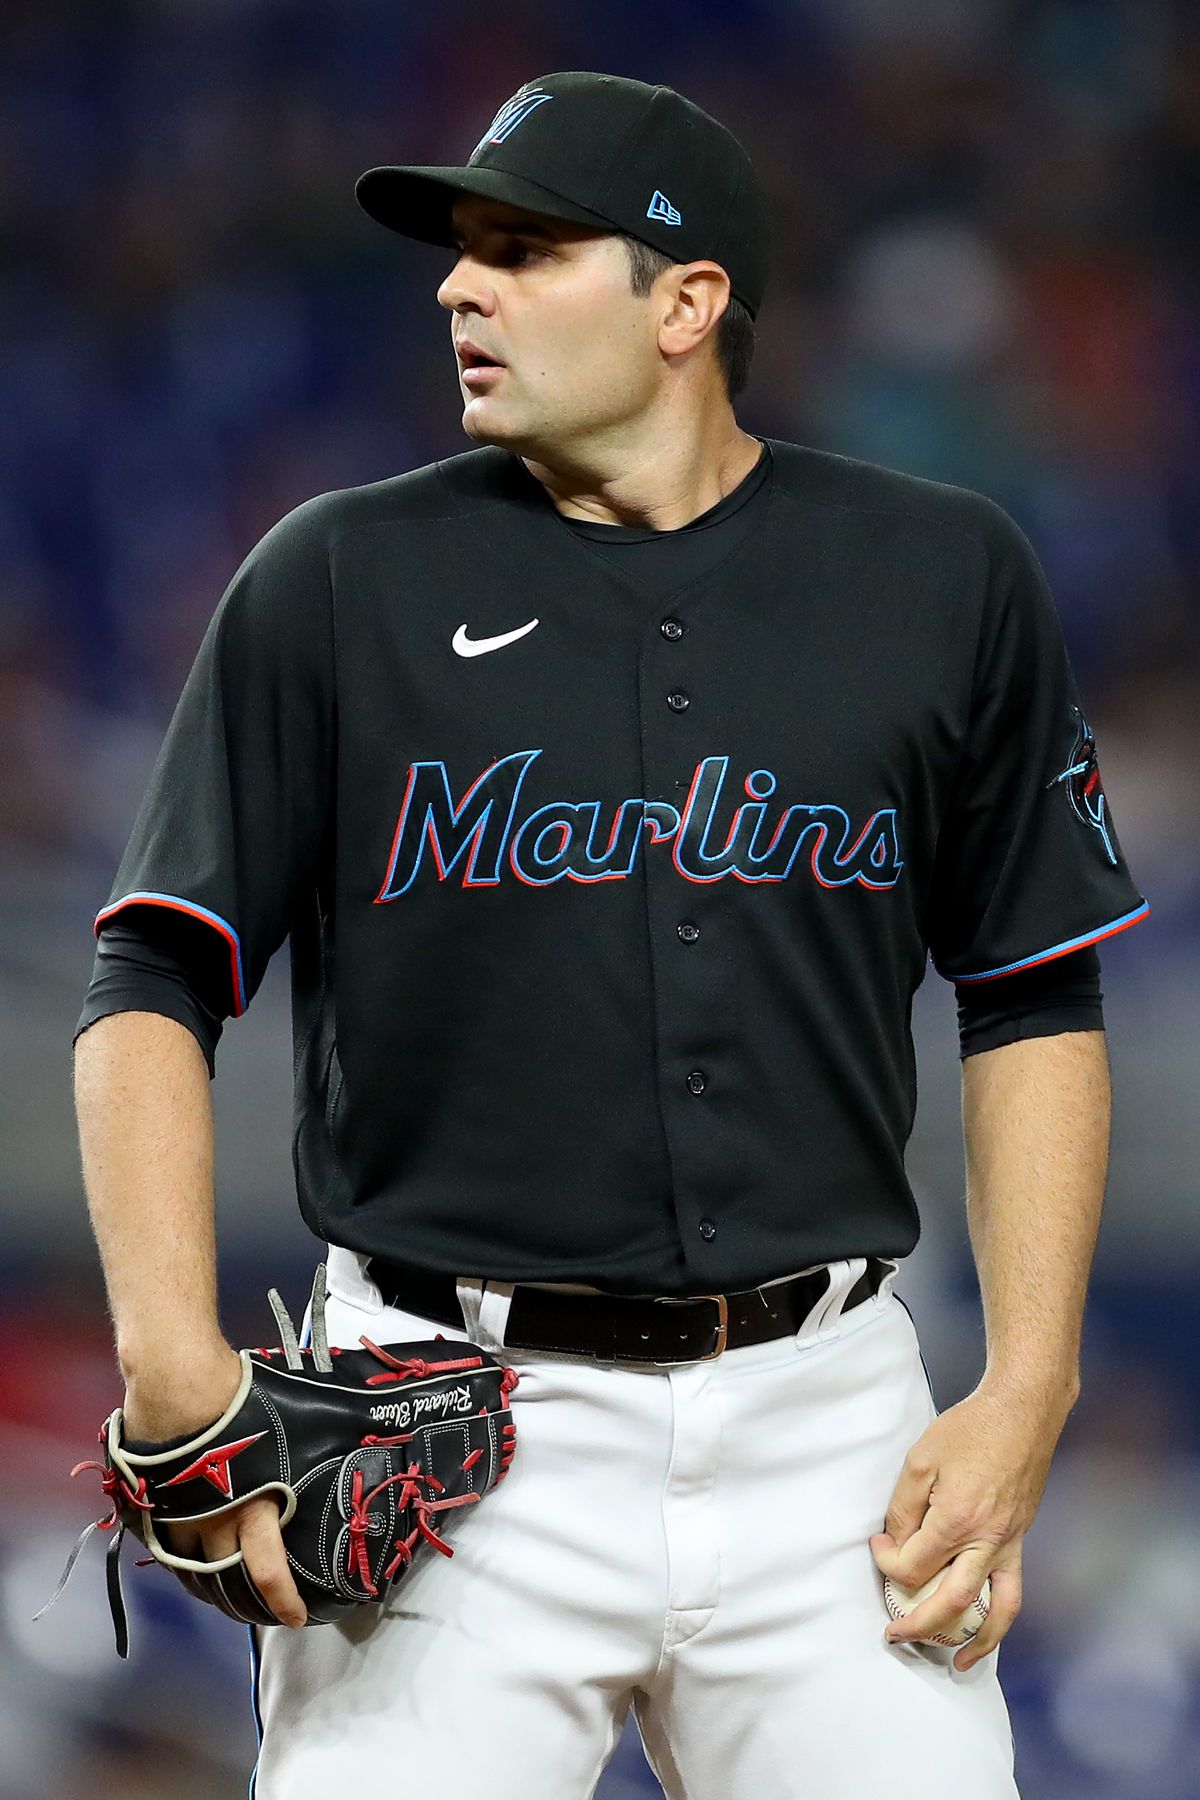 Richard Bleier #35 of the Miami Marlins delivers a pitch against the Washington Nationals at loanDepot park on September 23, 2022 in Miami, Florida.